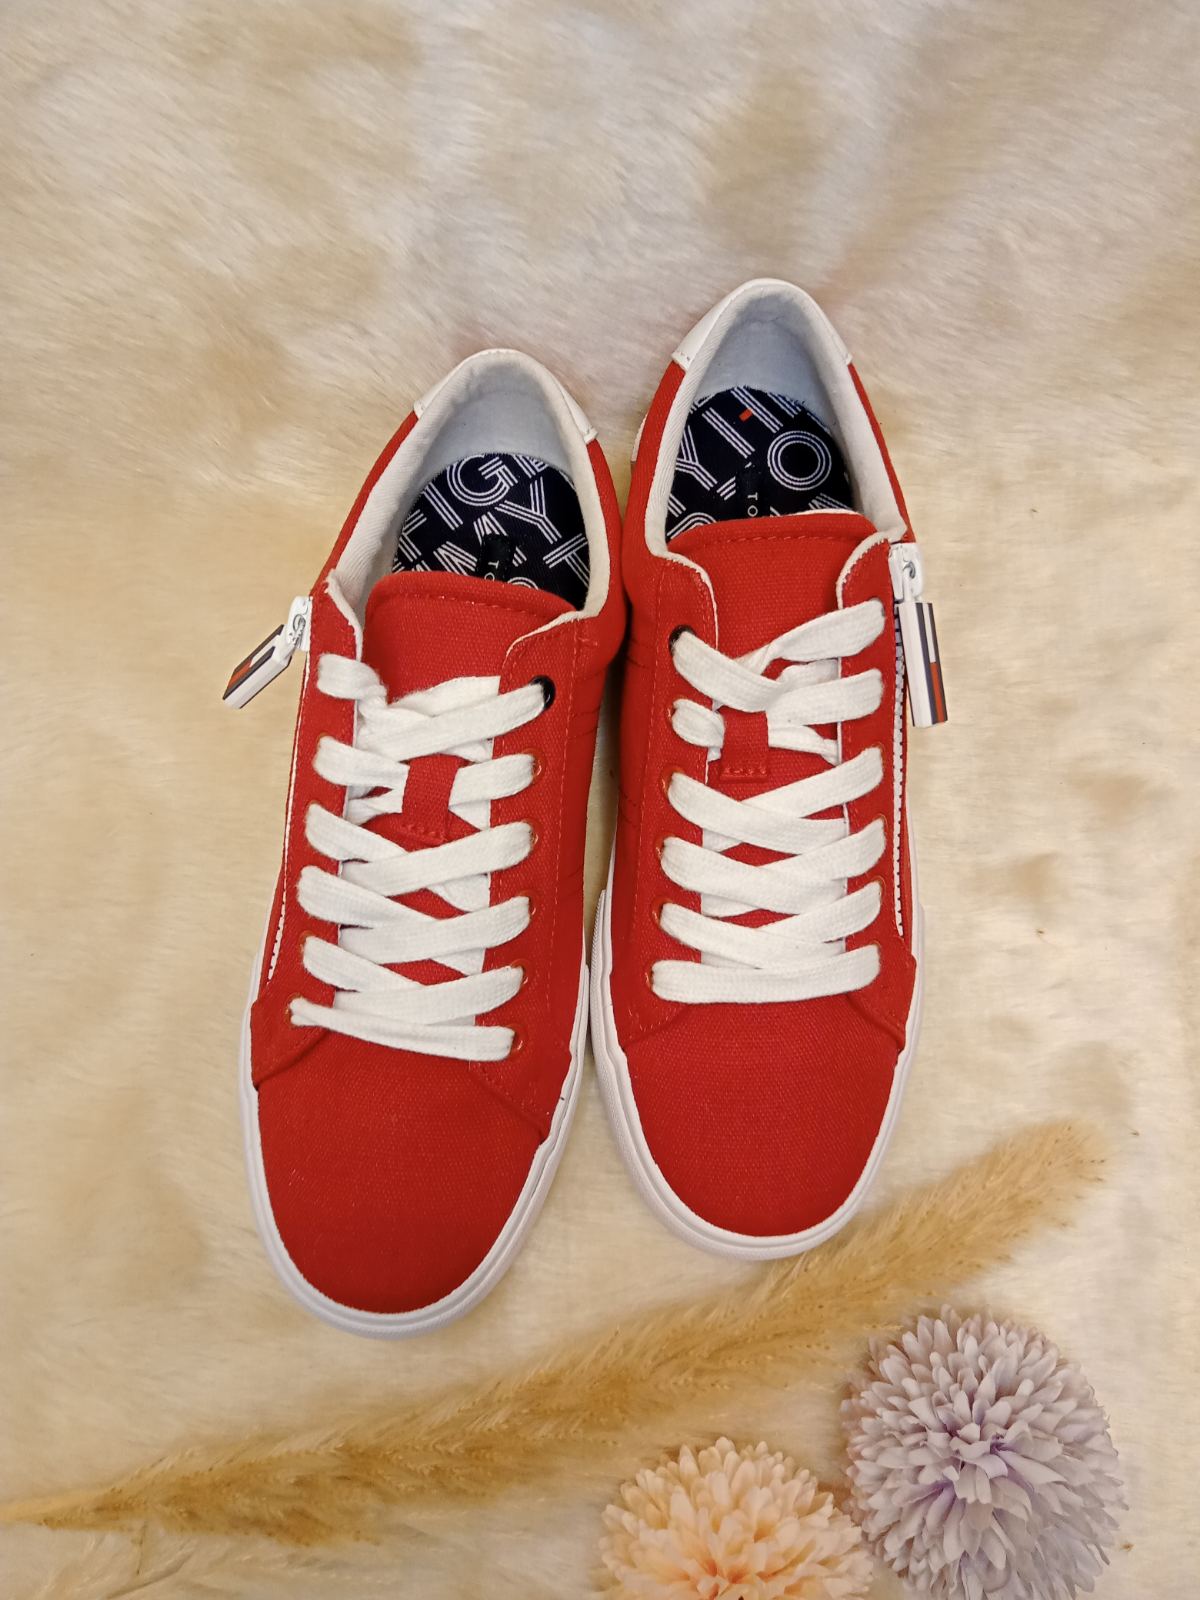 TOMMY HILFIGER SHOES FOR WOMEN'S PASKAL RED SIZE 7 - Curate